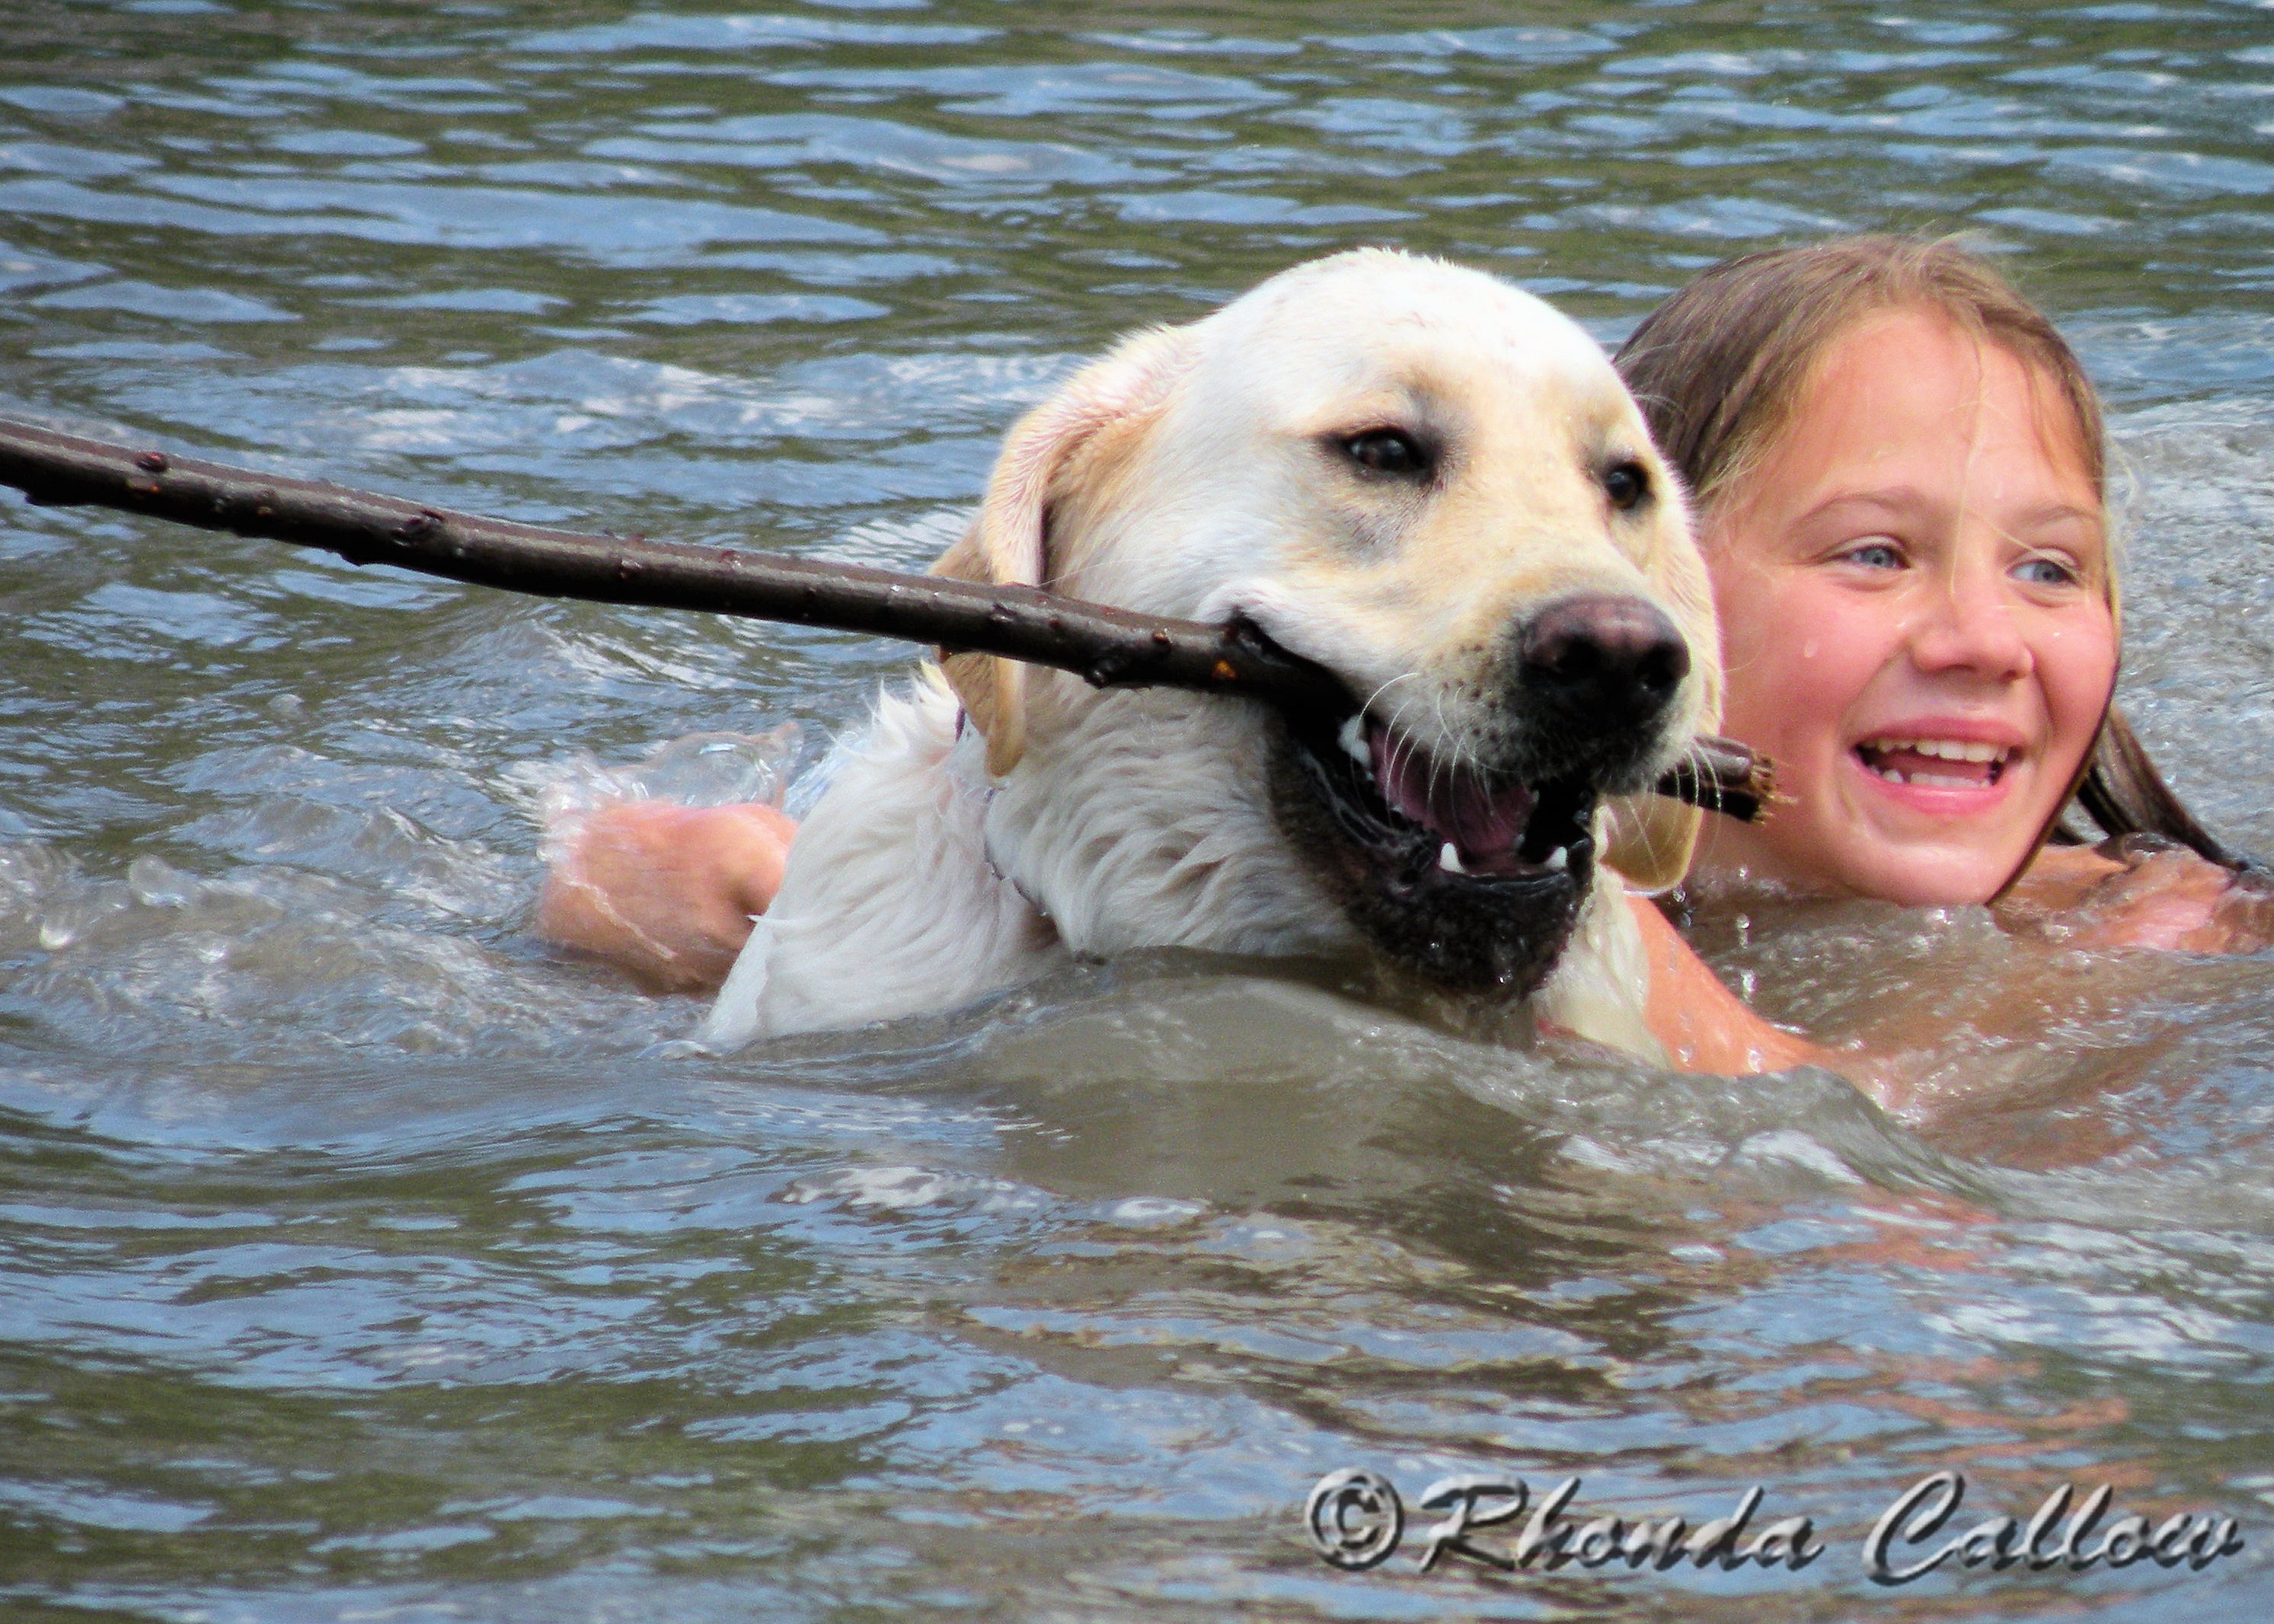 Happy yellow Labrador and girl swimming in a lake in BC, Canada